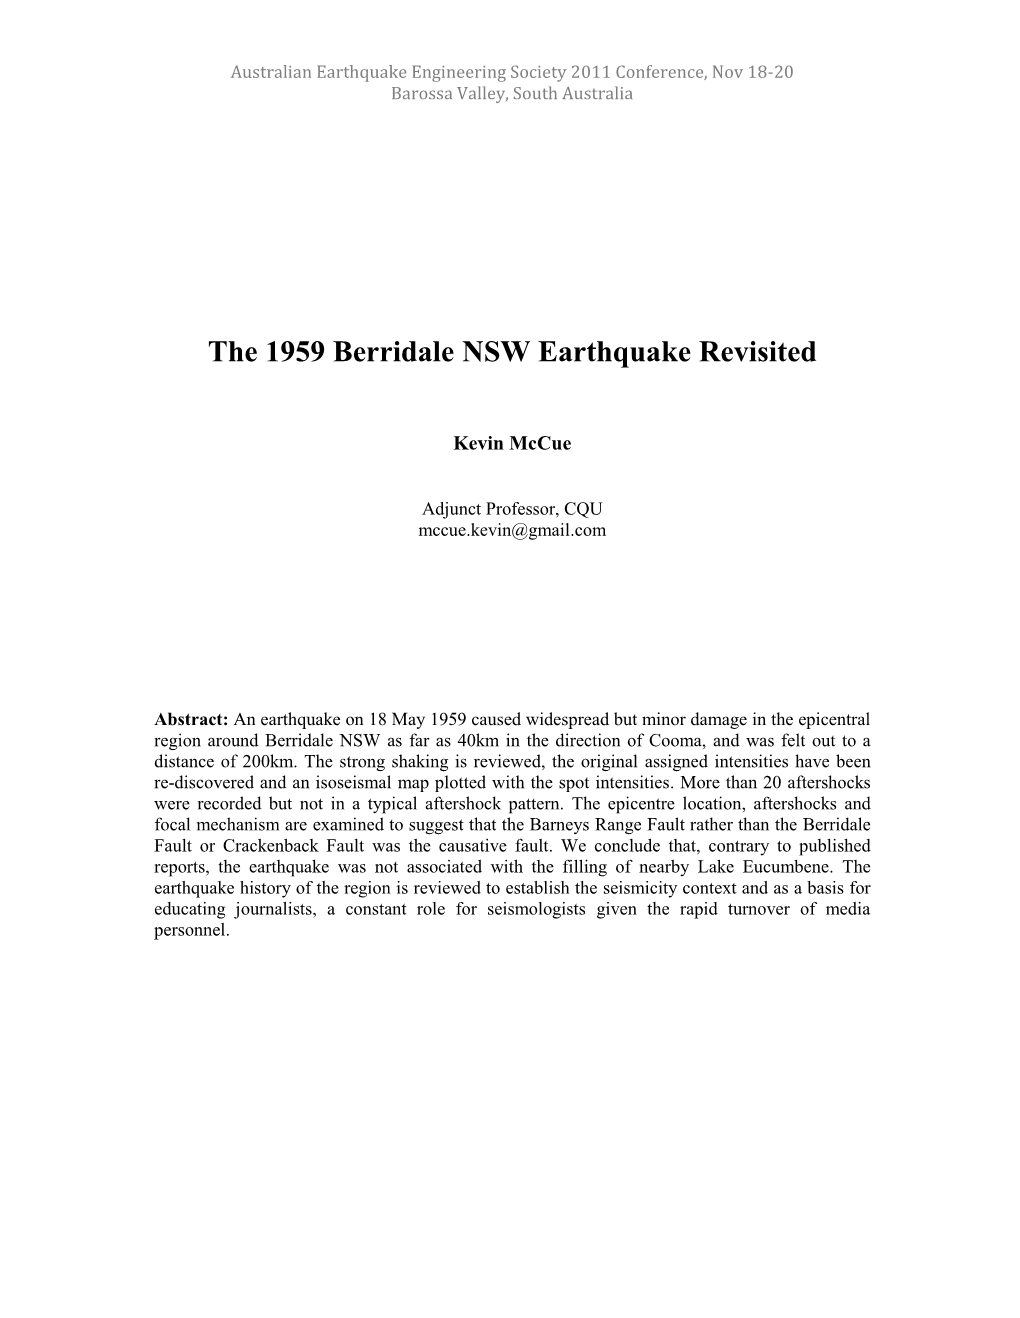 The 1959 Berridale NSW Earthquake Revisited